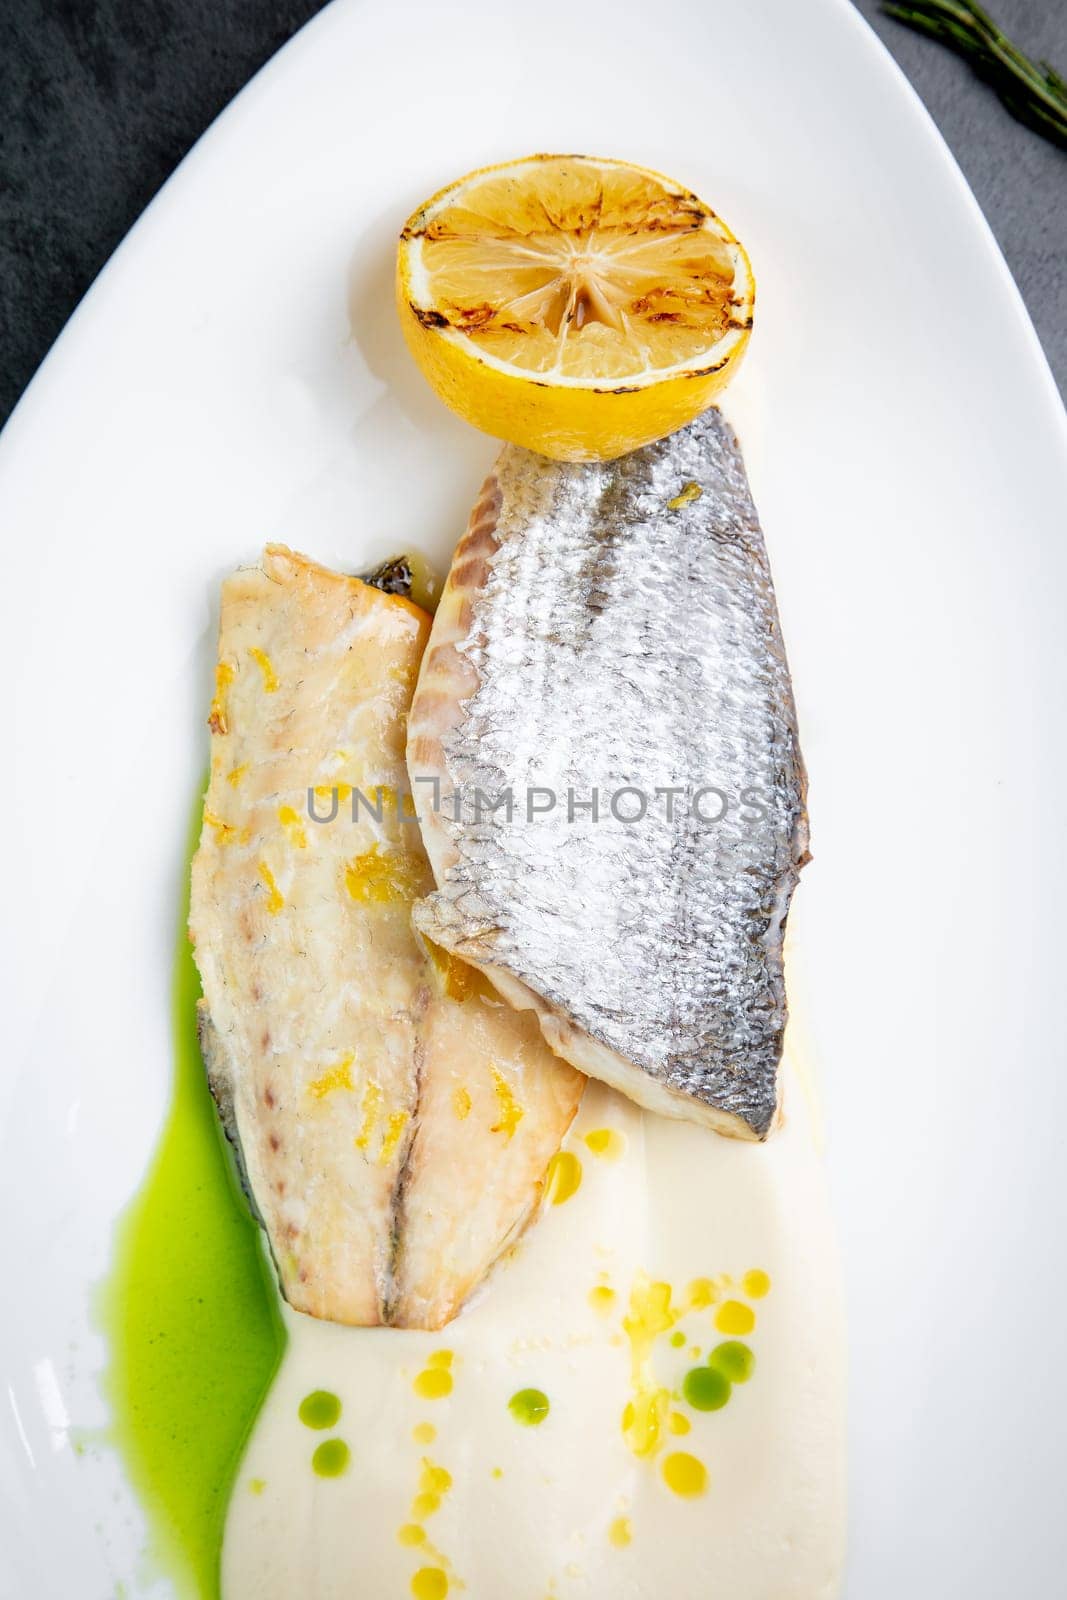 pieces of fried fish with sauce and fried lemon on a white plate side view by tewolf